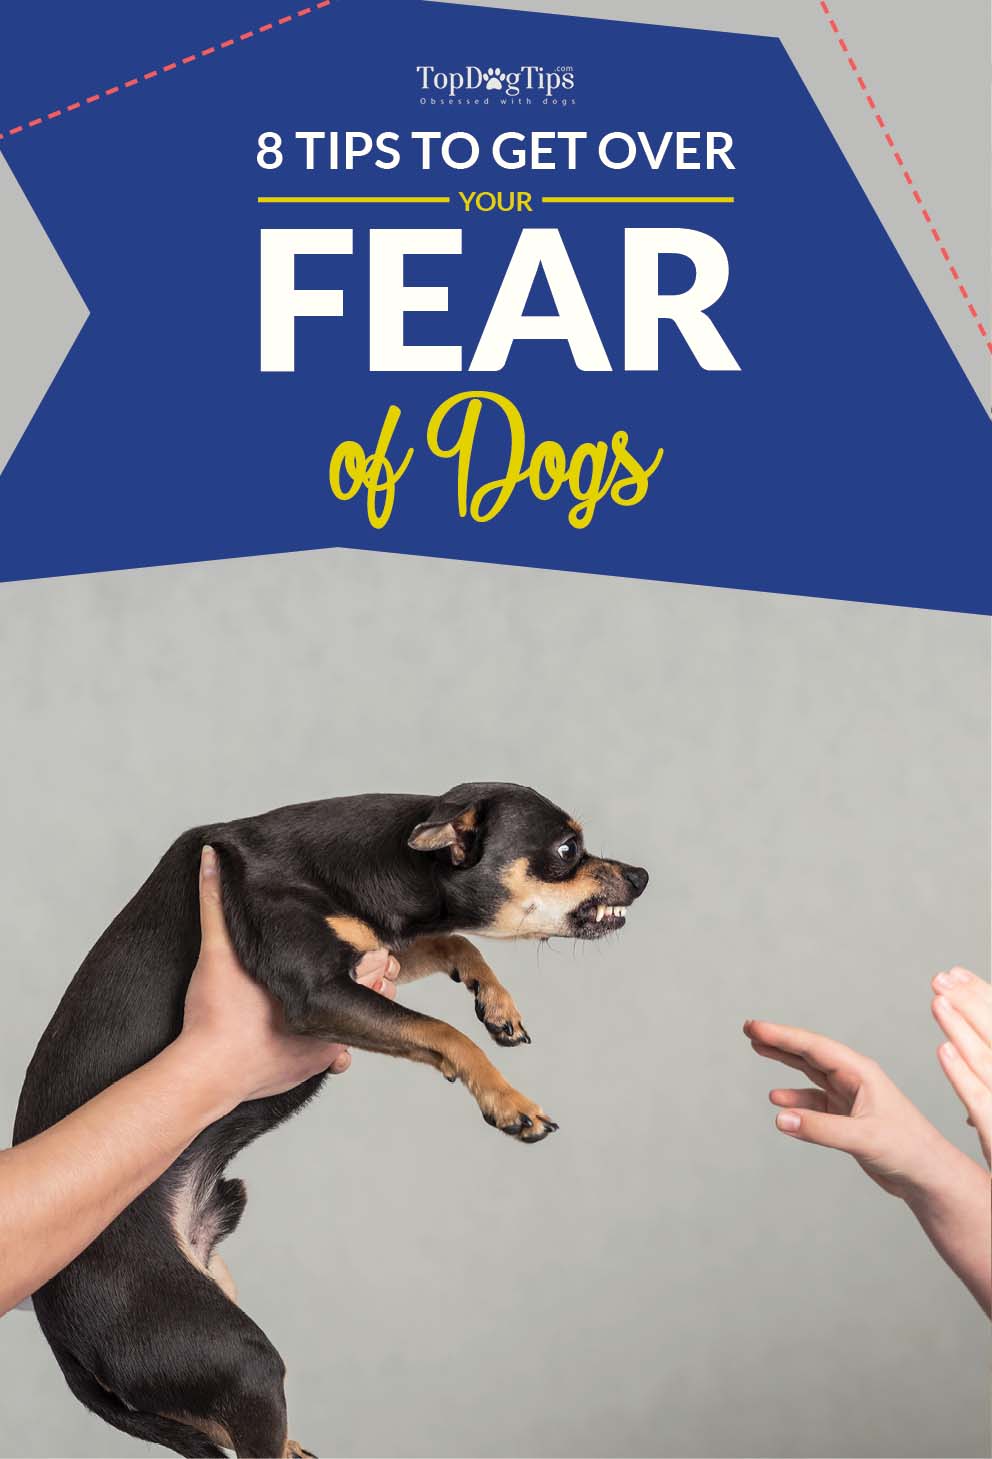 8 Tips on How to Get Over a Fear of Dogs (as per Animal ...